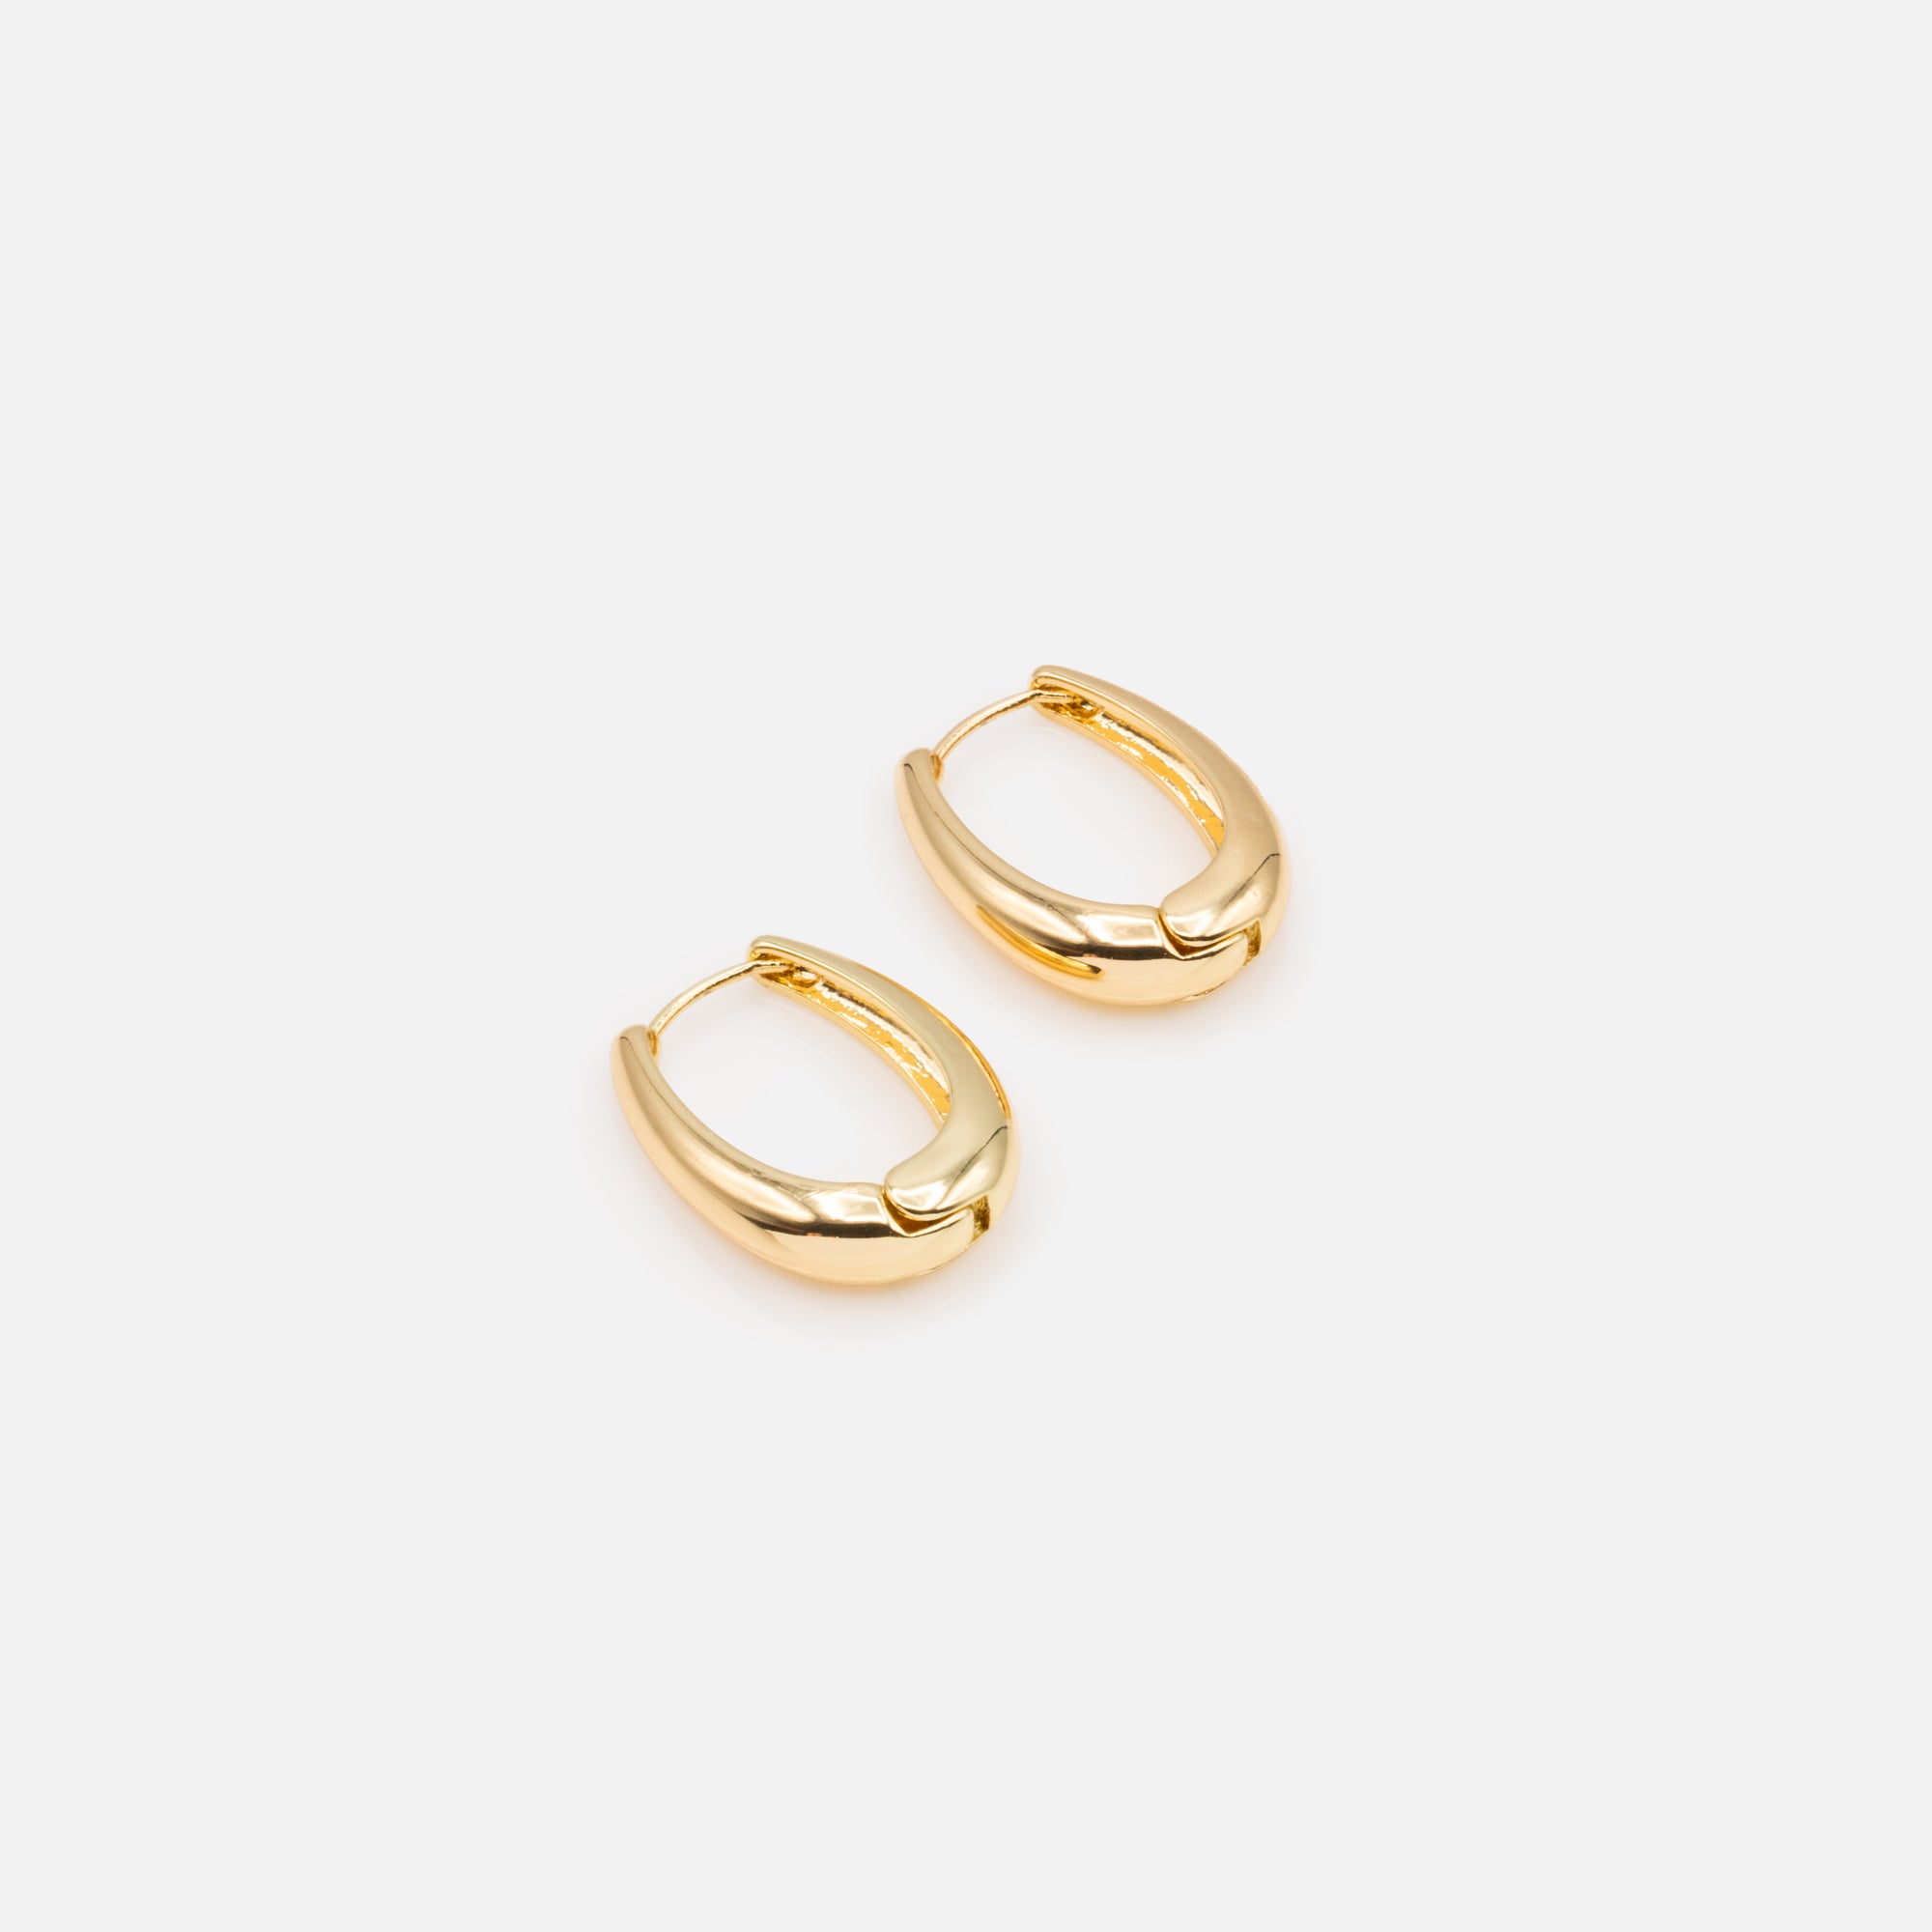 Small gold oval earrings with a wide base in stainless steel